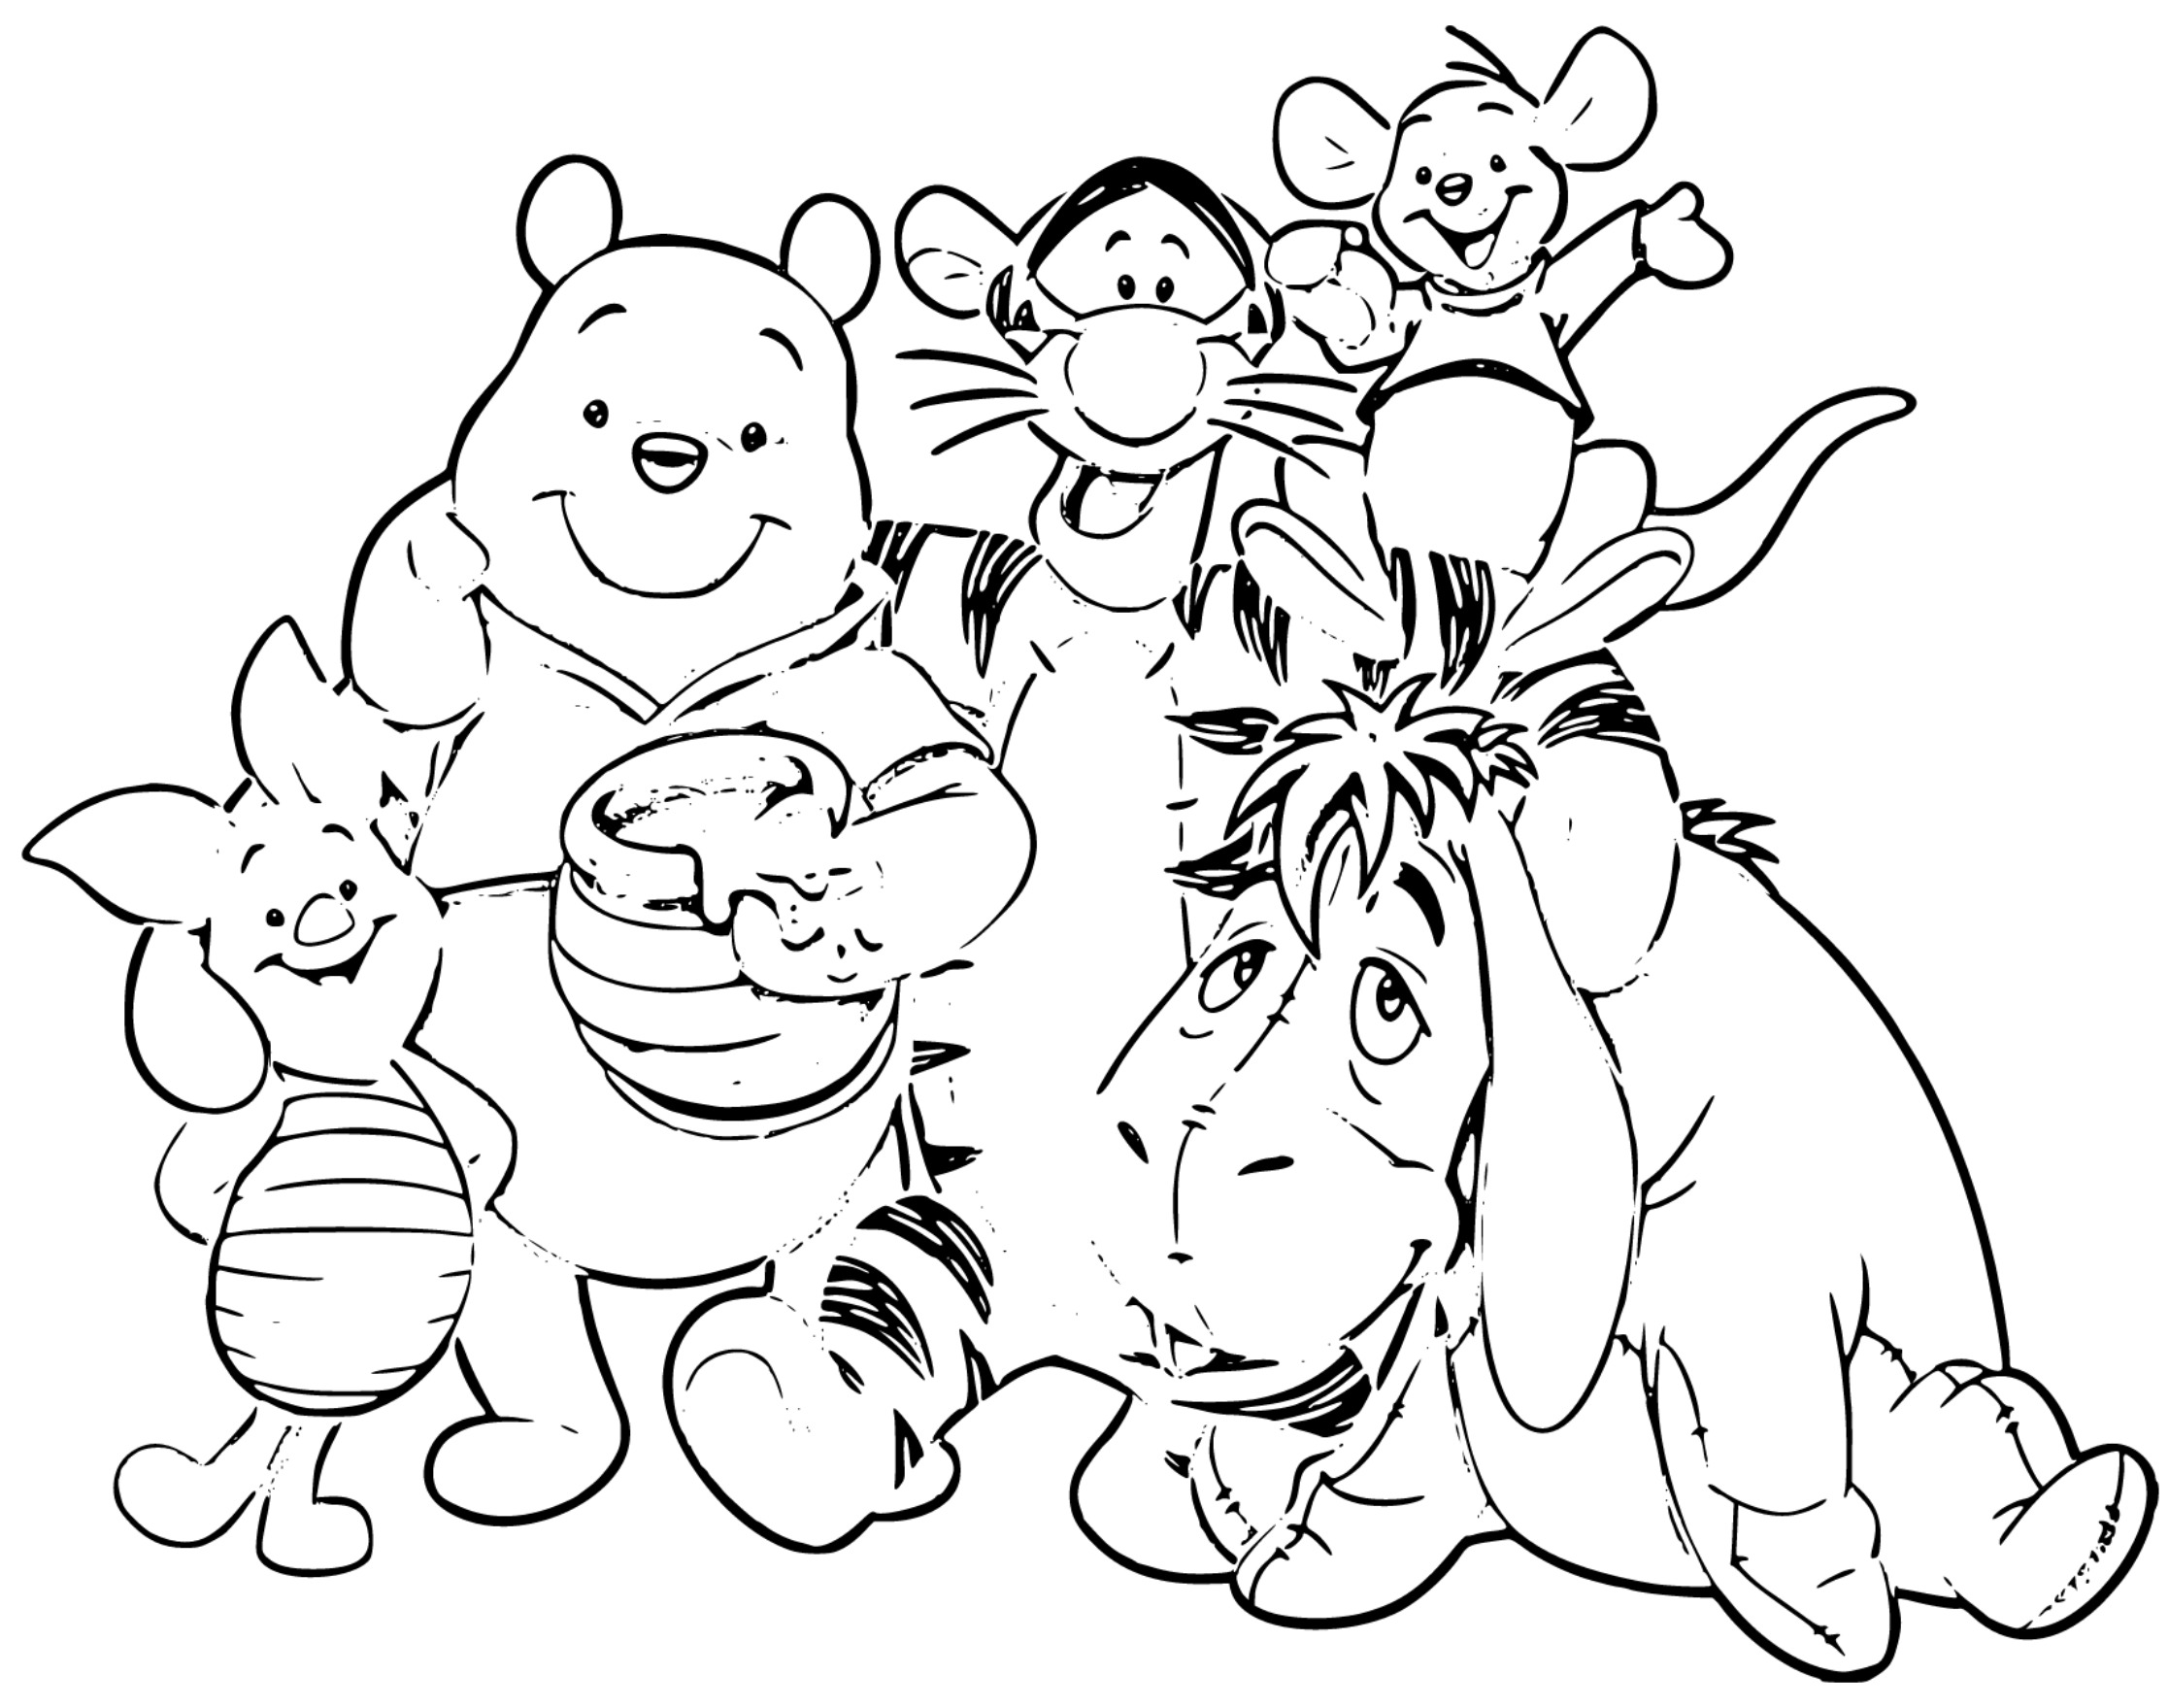 Printable Winnie the Pooh and friends Coloring Page for kids.